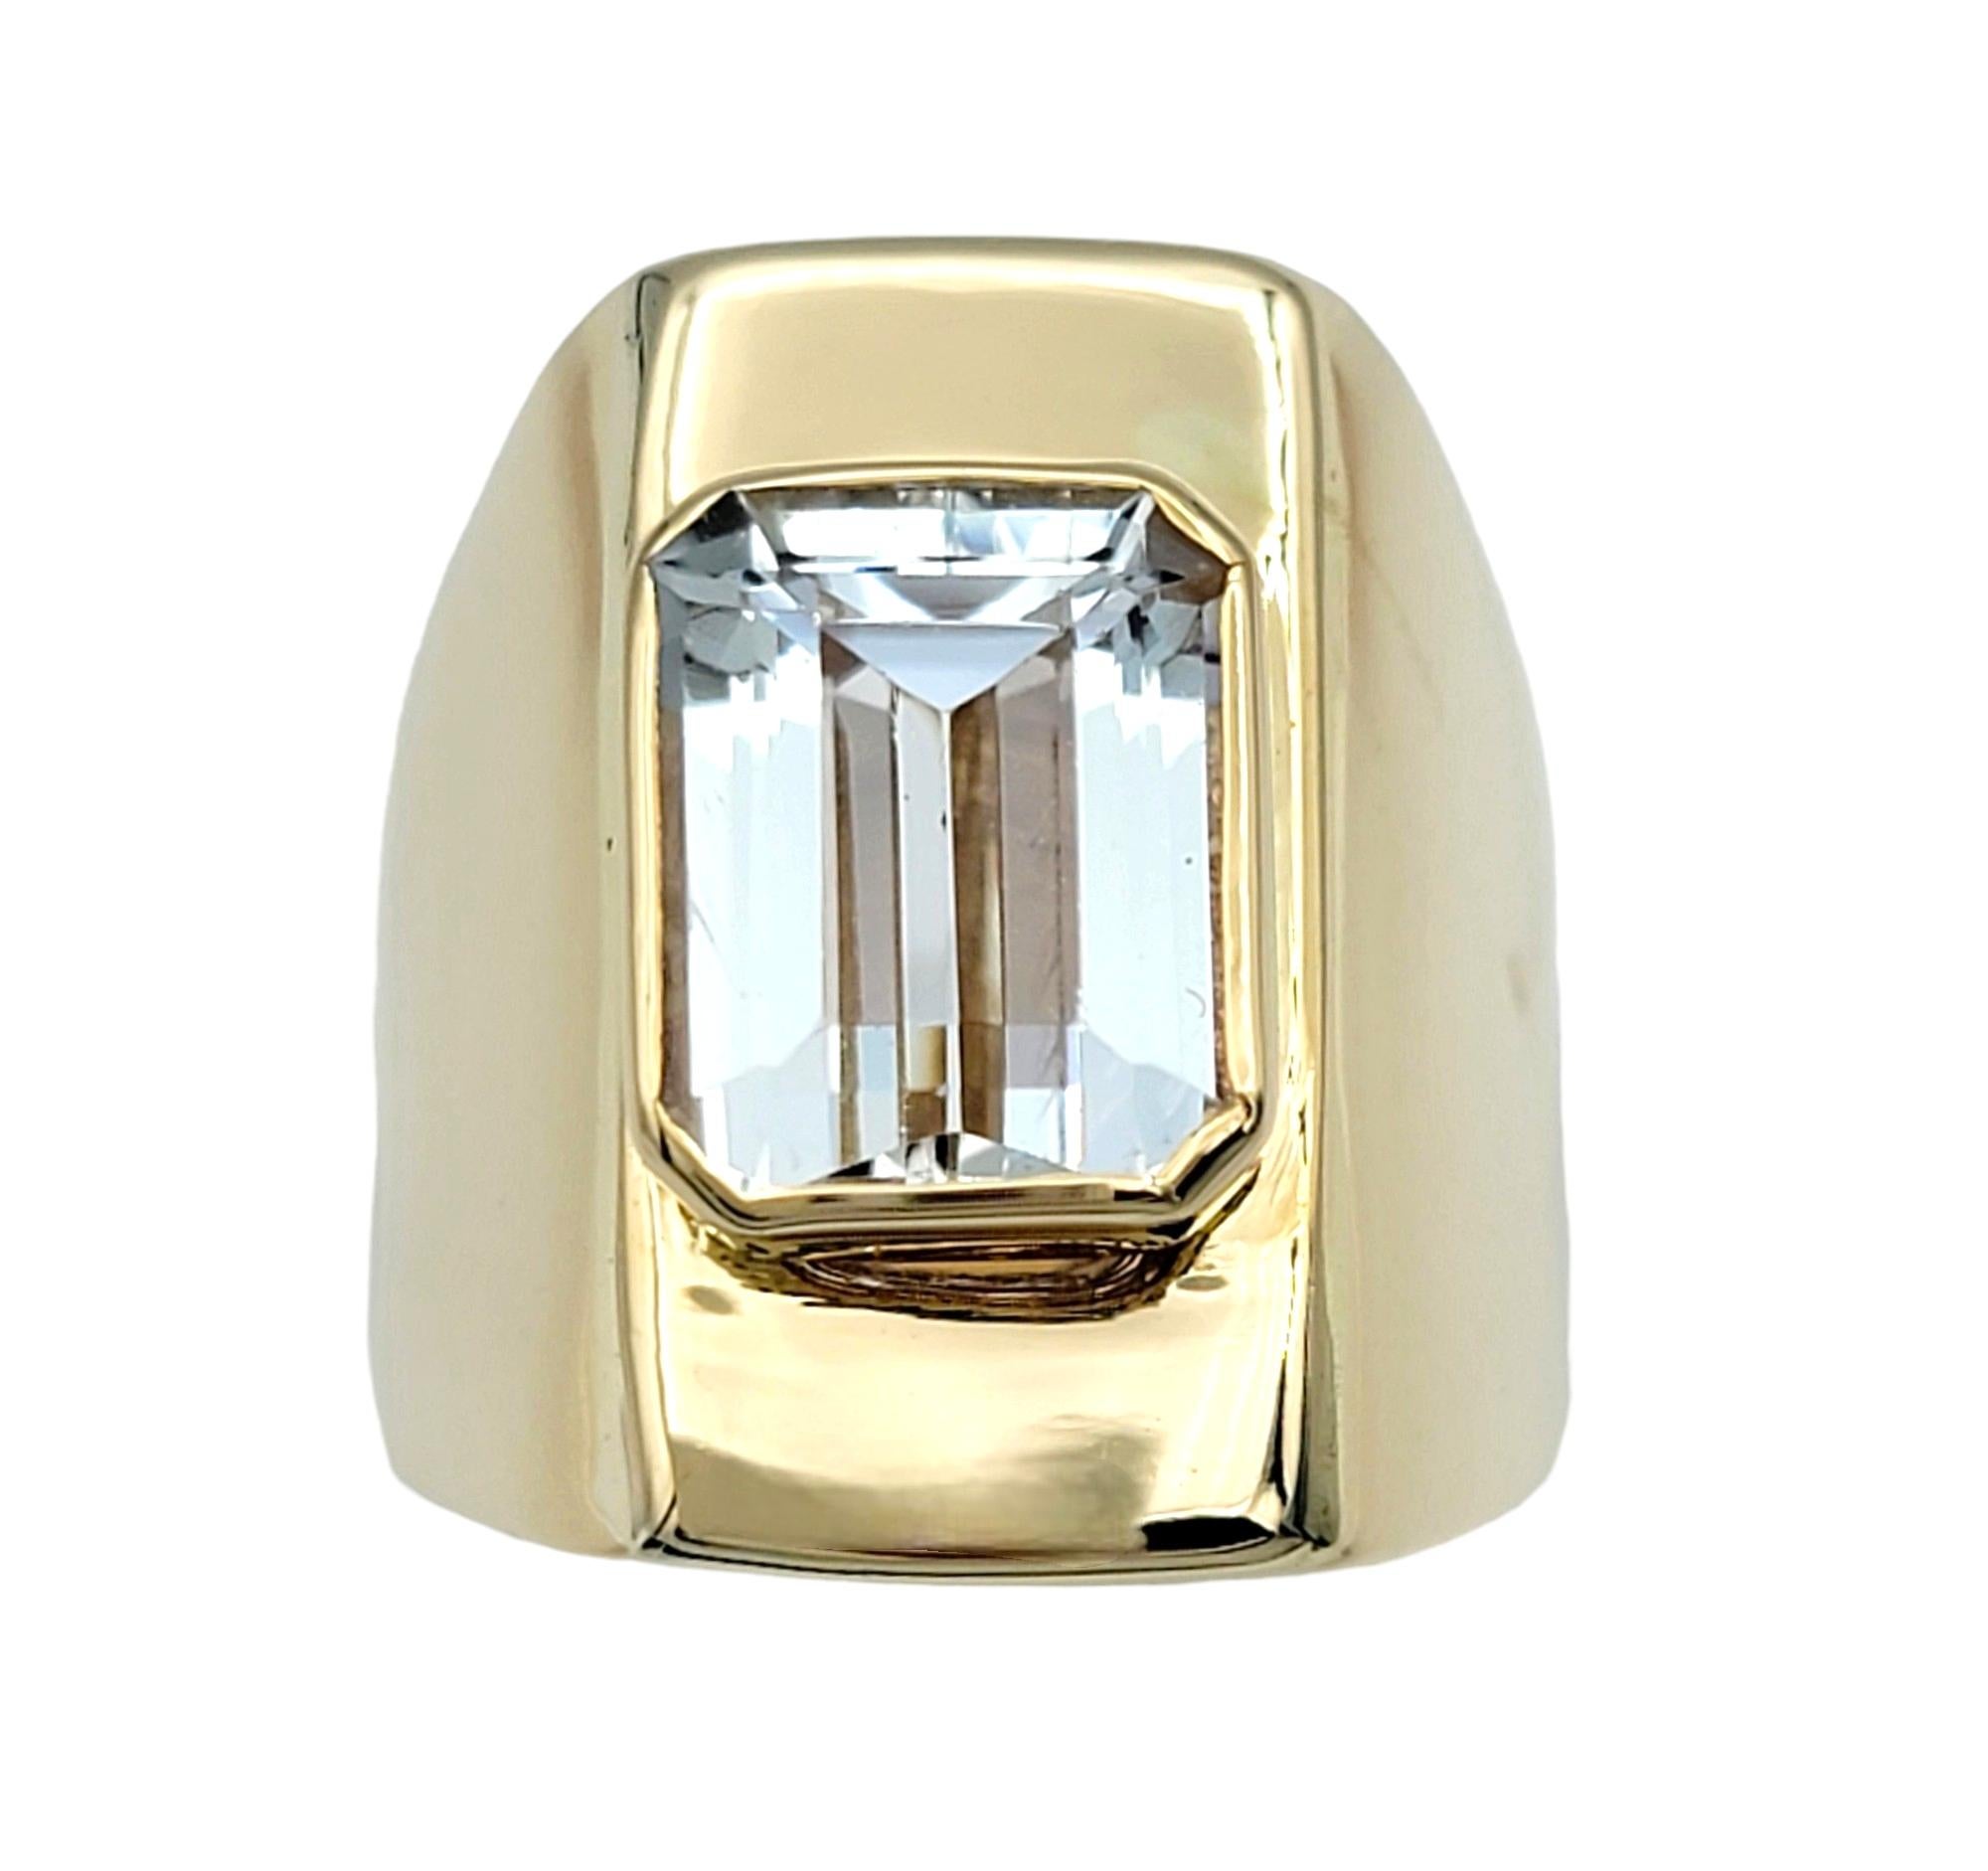 Contemporary Emerald Cut Goshenite Beryl Solitaire Cocktail Ring Set in 14 Karat Yellow Gold For Sale